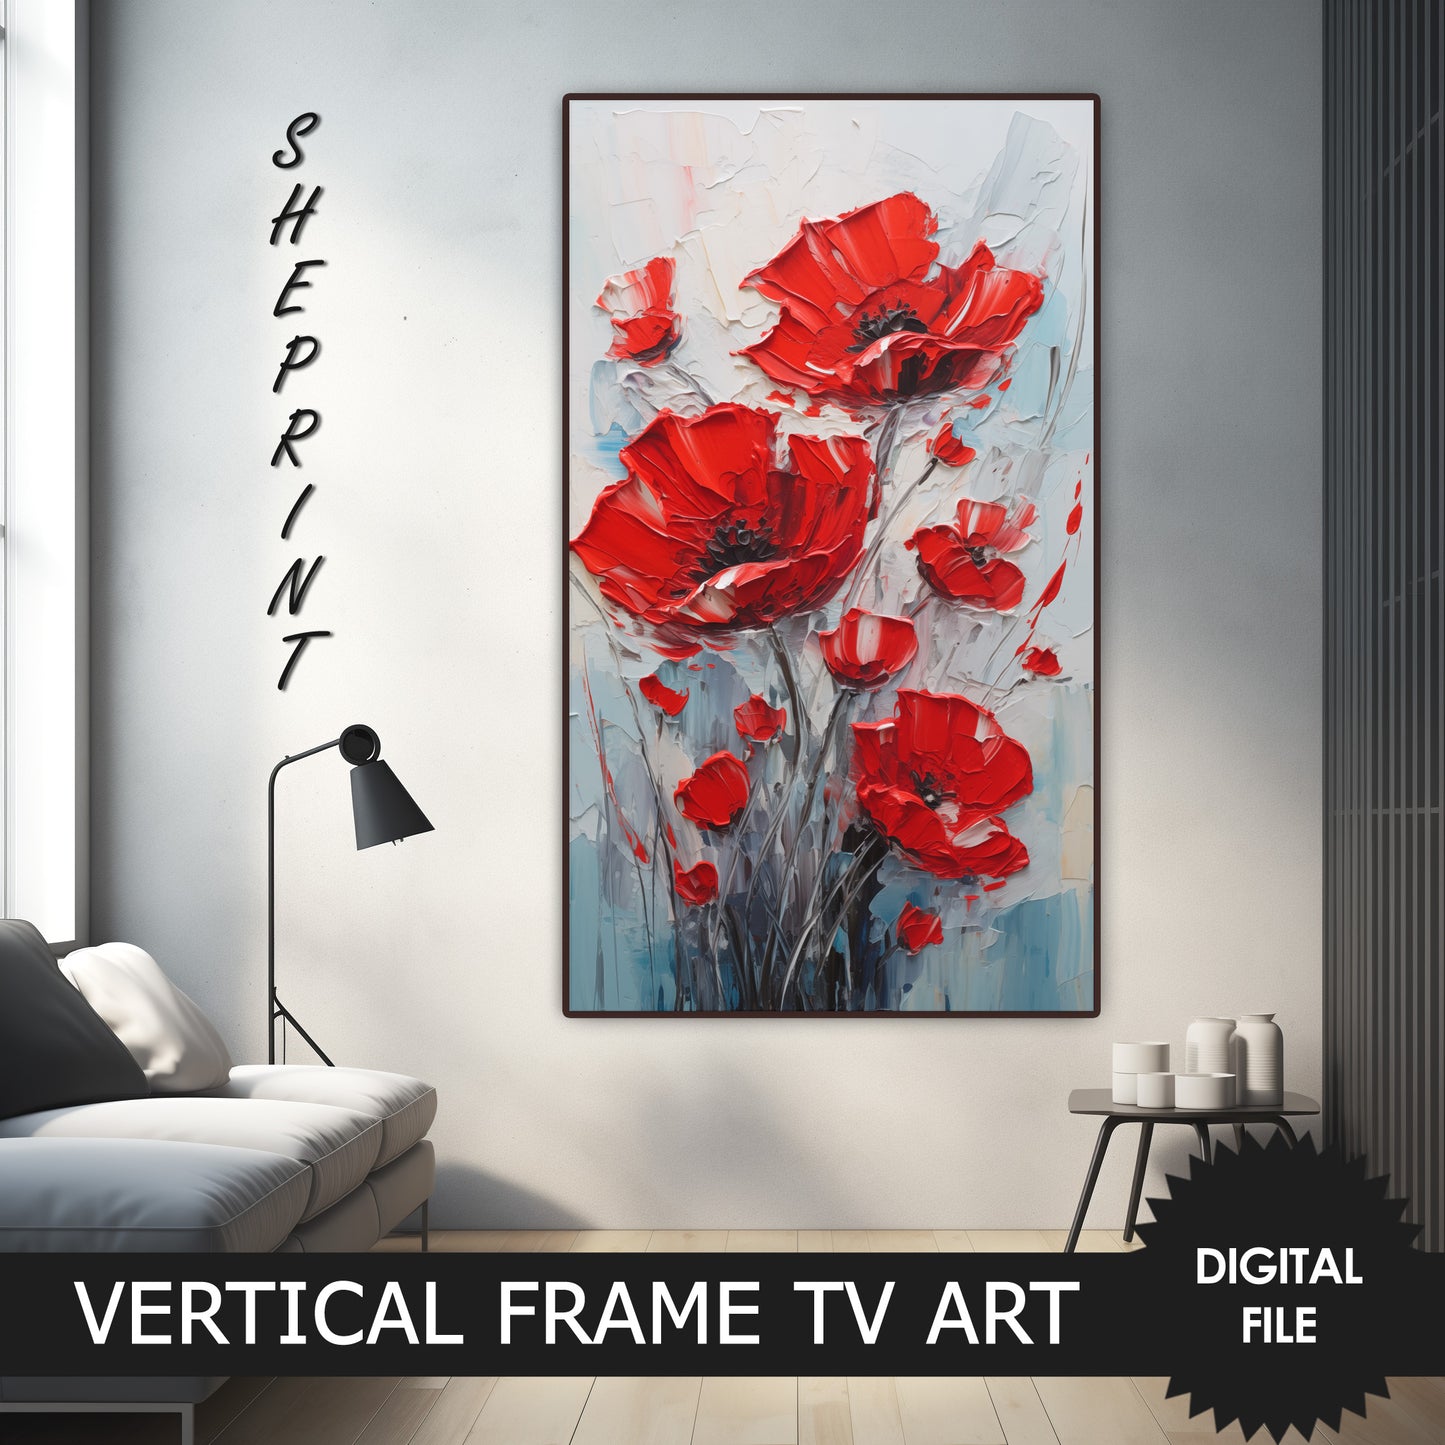 Vertical Frame TV Art, Red Poppies Pallete Knife Oil Painting preview on Samsung Frame TV when mounted vertically